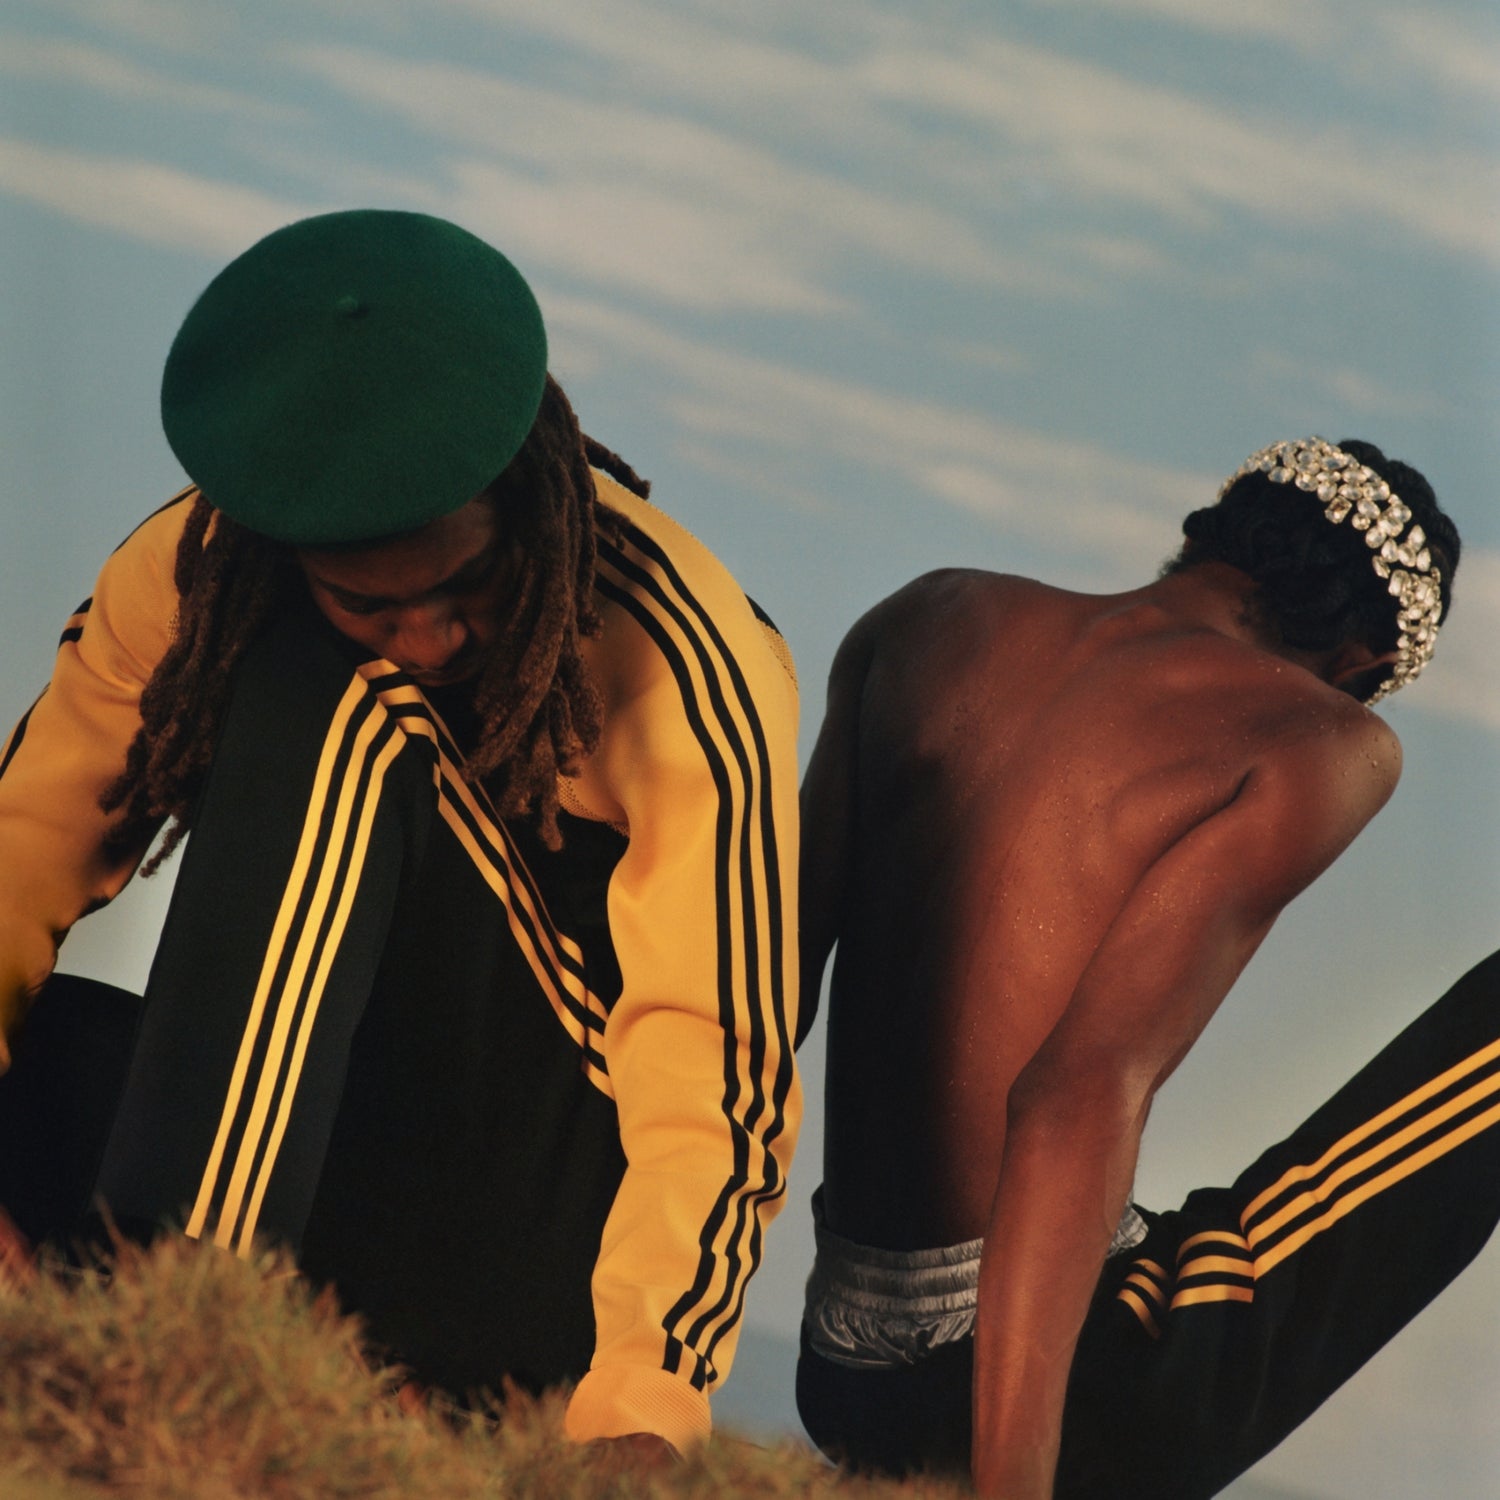 ADIDAS ORIGINALS BY WALES BONNER<br>SS23 COLLECTION